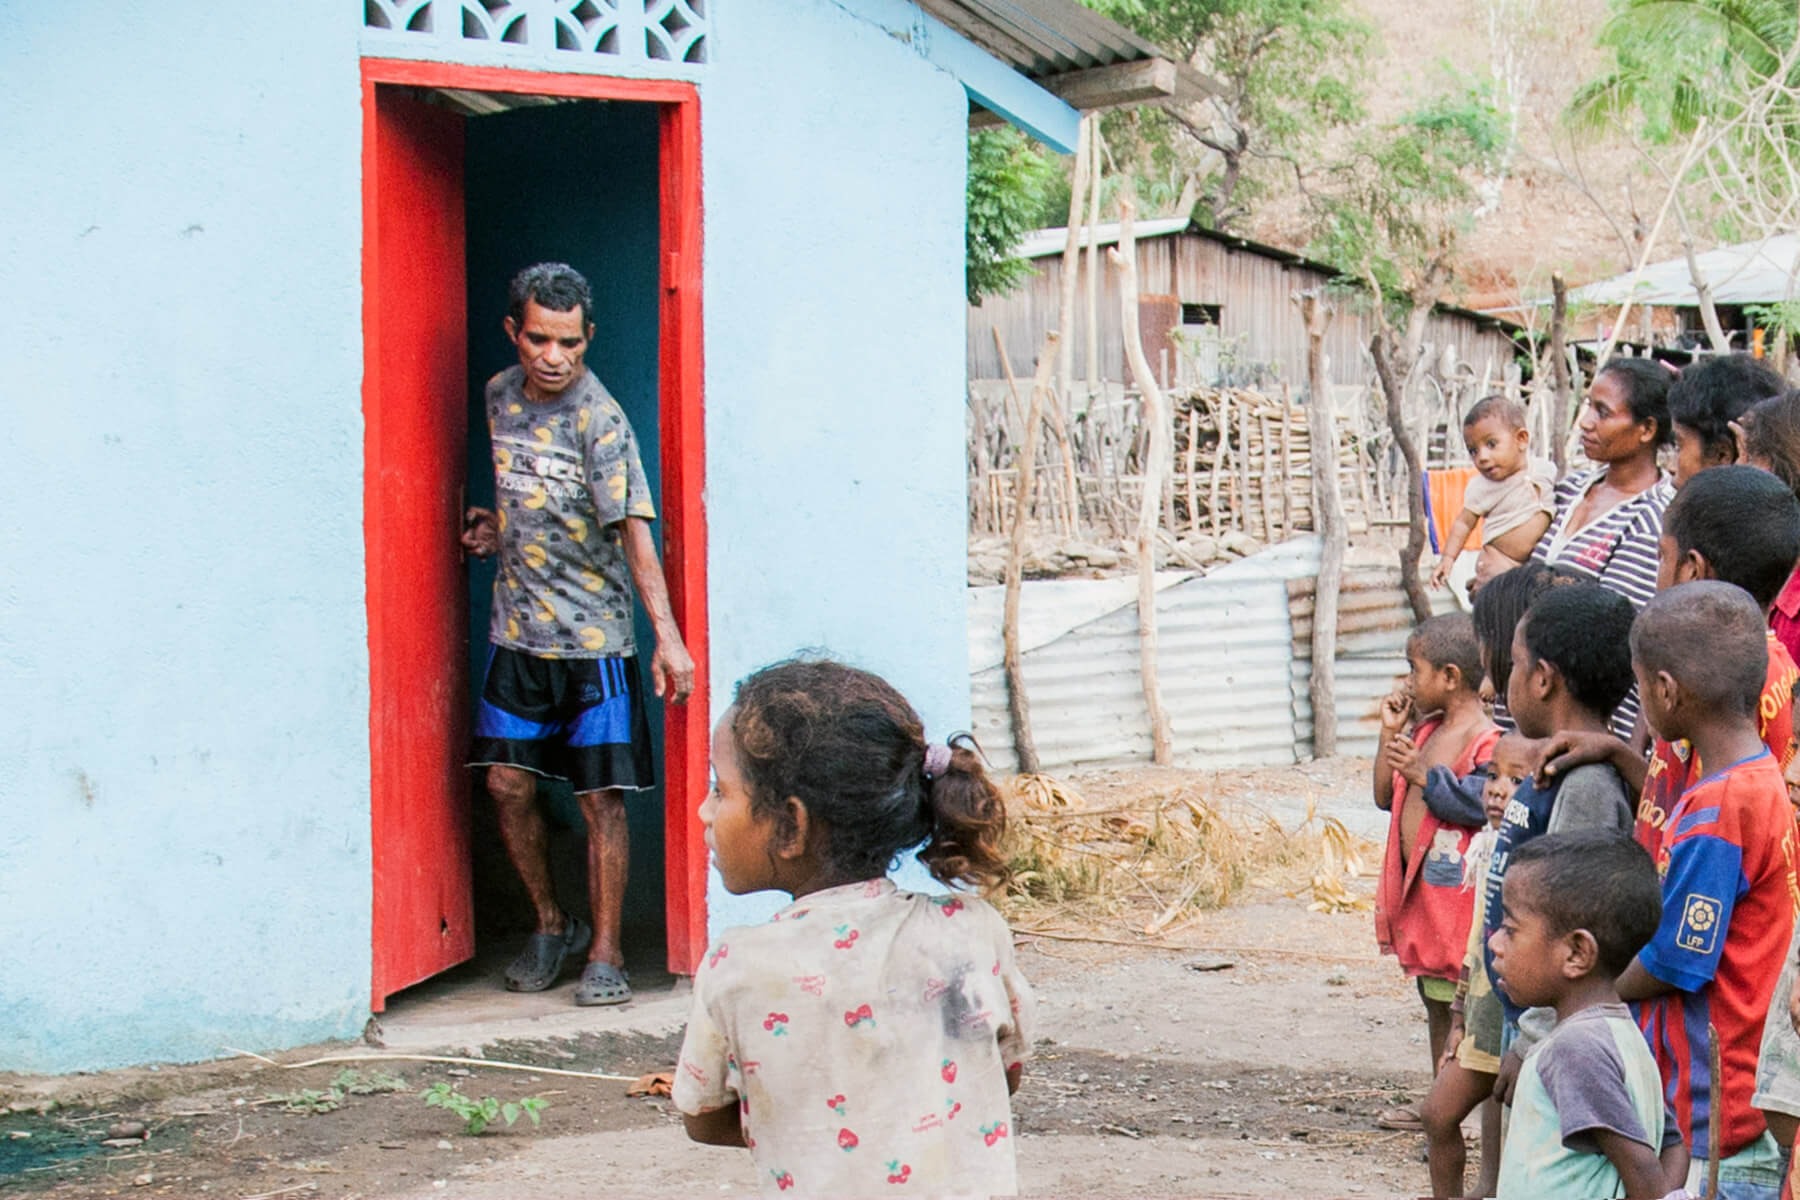 A small crowd gathers to see the new toilet your gifts constructed in Timor Leste